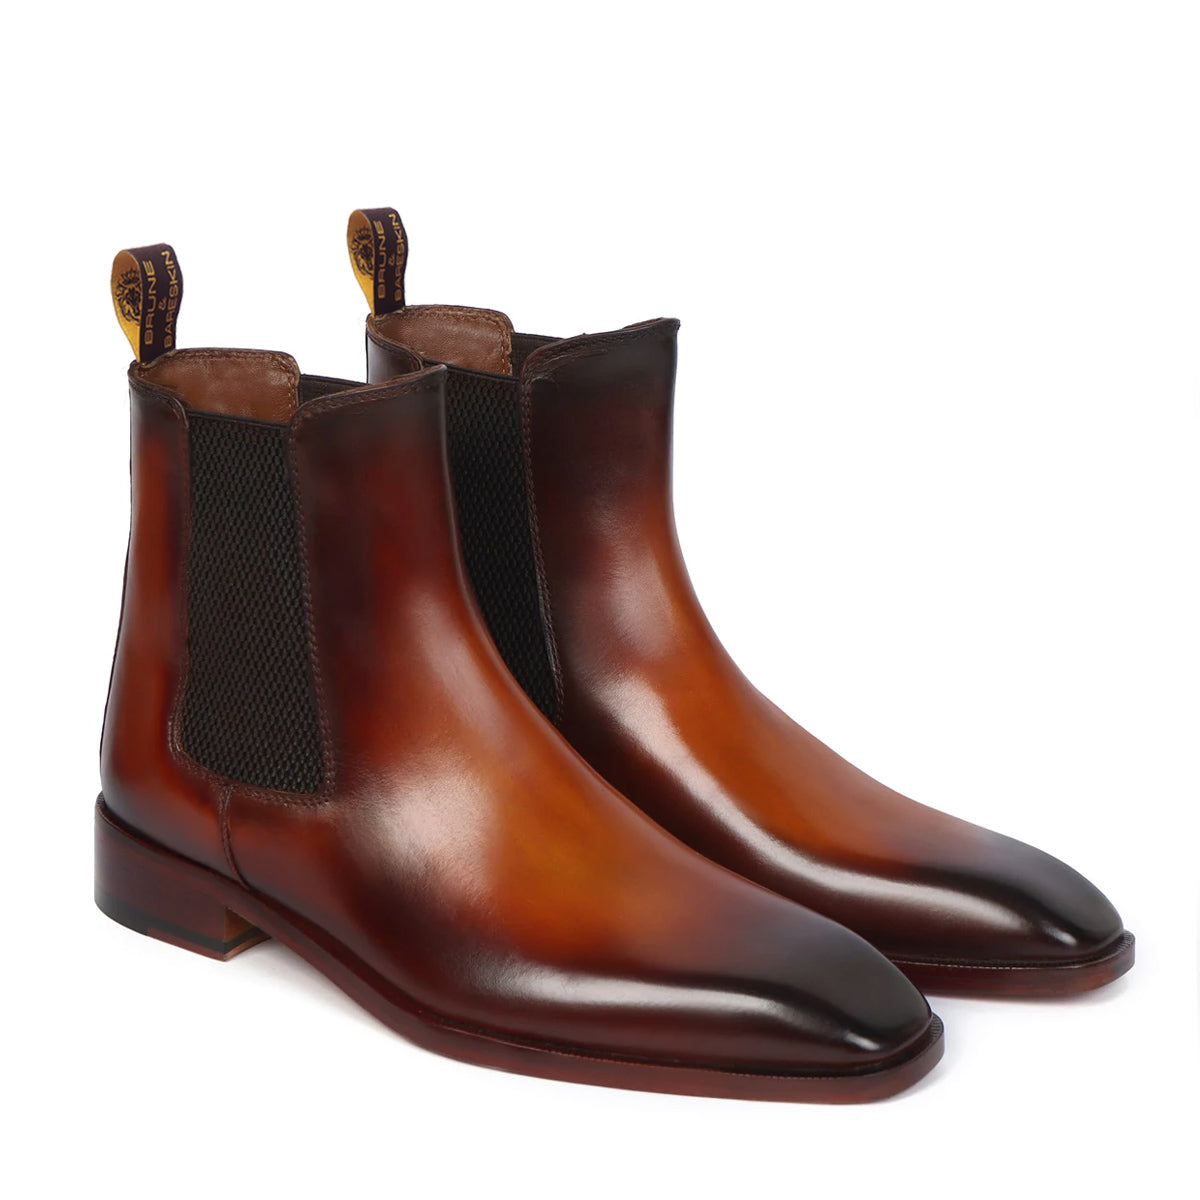 Tan Chelsea Boots For Men With Leather Sole